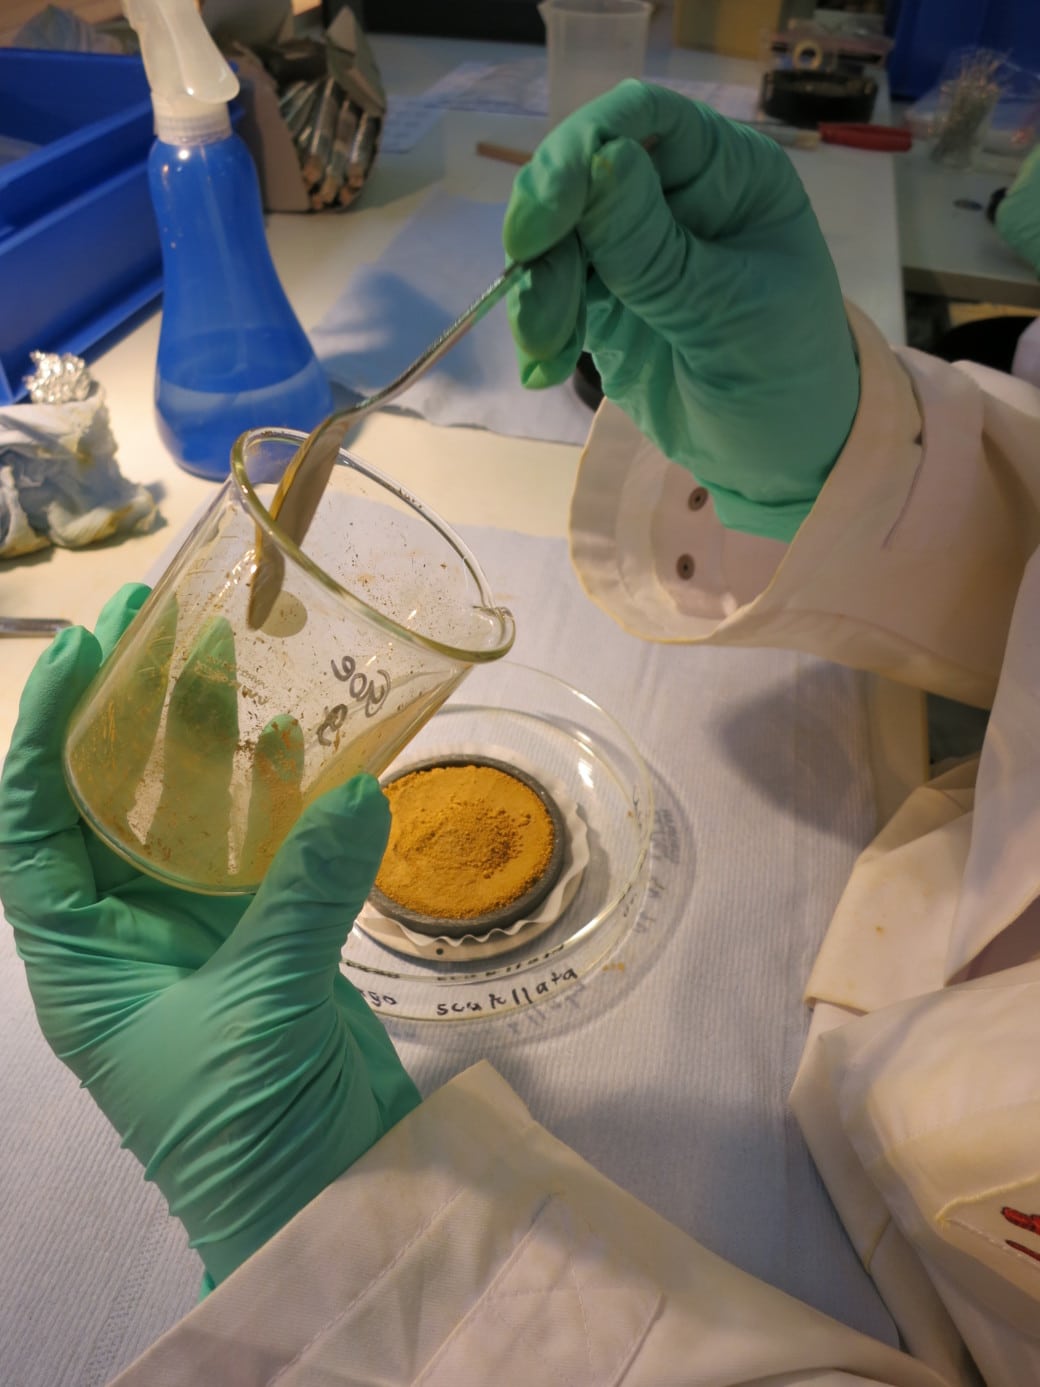 Picture: The photo shows the situation of filling a mineral container. On a work table there is a flat glass bowl containing the mineral container. The round flat container is filled with an orange-brown soil substance. Above the container you can see the arms and hands of a person wearing a lab coat and green latex gloves. The left hand holds a glass beaker while the right hand holds a spoon in the beaker to pick up the remains of the soil substance still in it